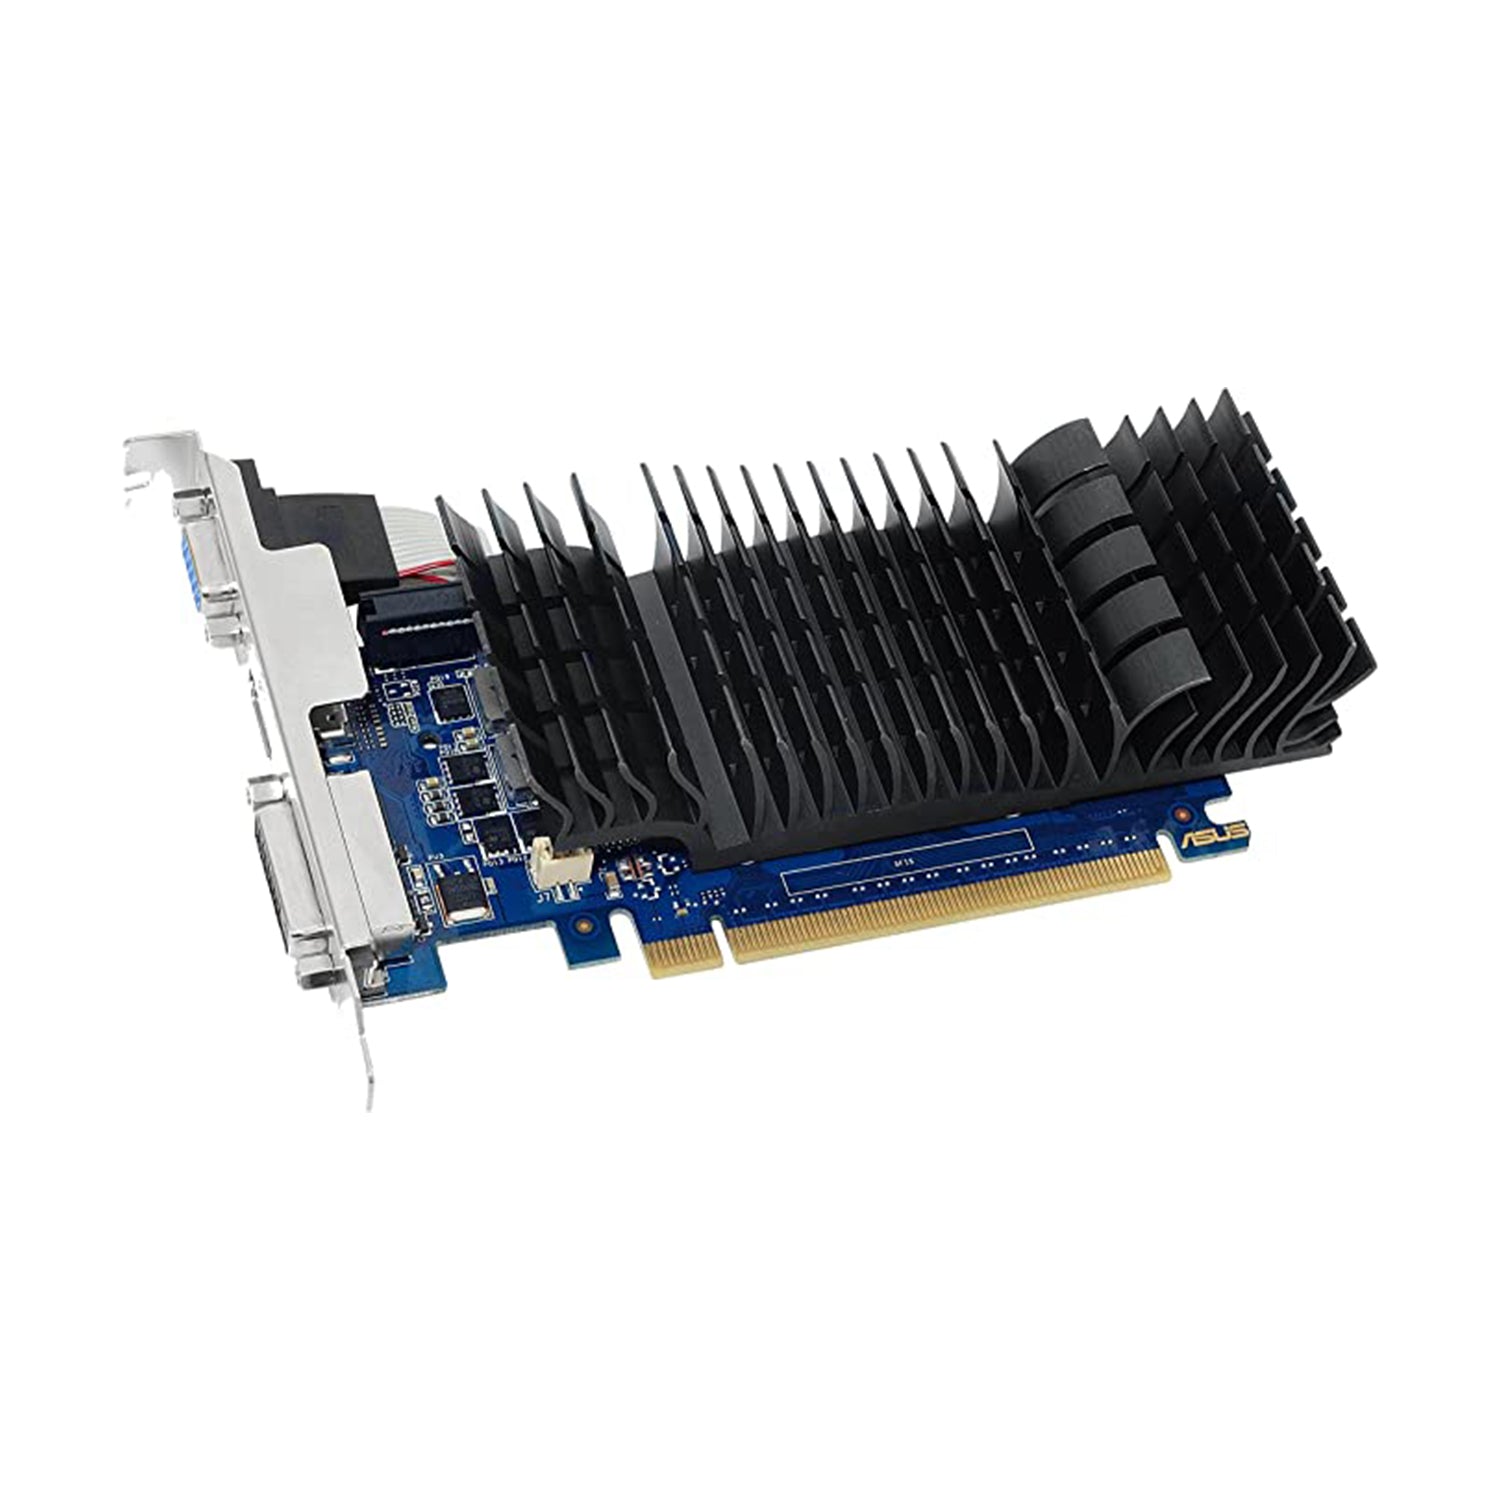 ASUS GeForce GT 730 2GB GDDR5 low profile graphics card for silent HTPC build (with I/O port brackets), HDMI, DVI-D